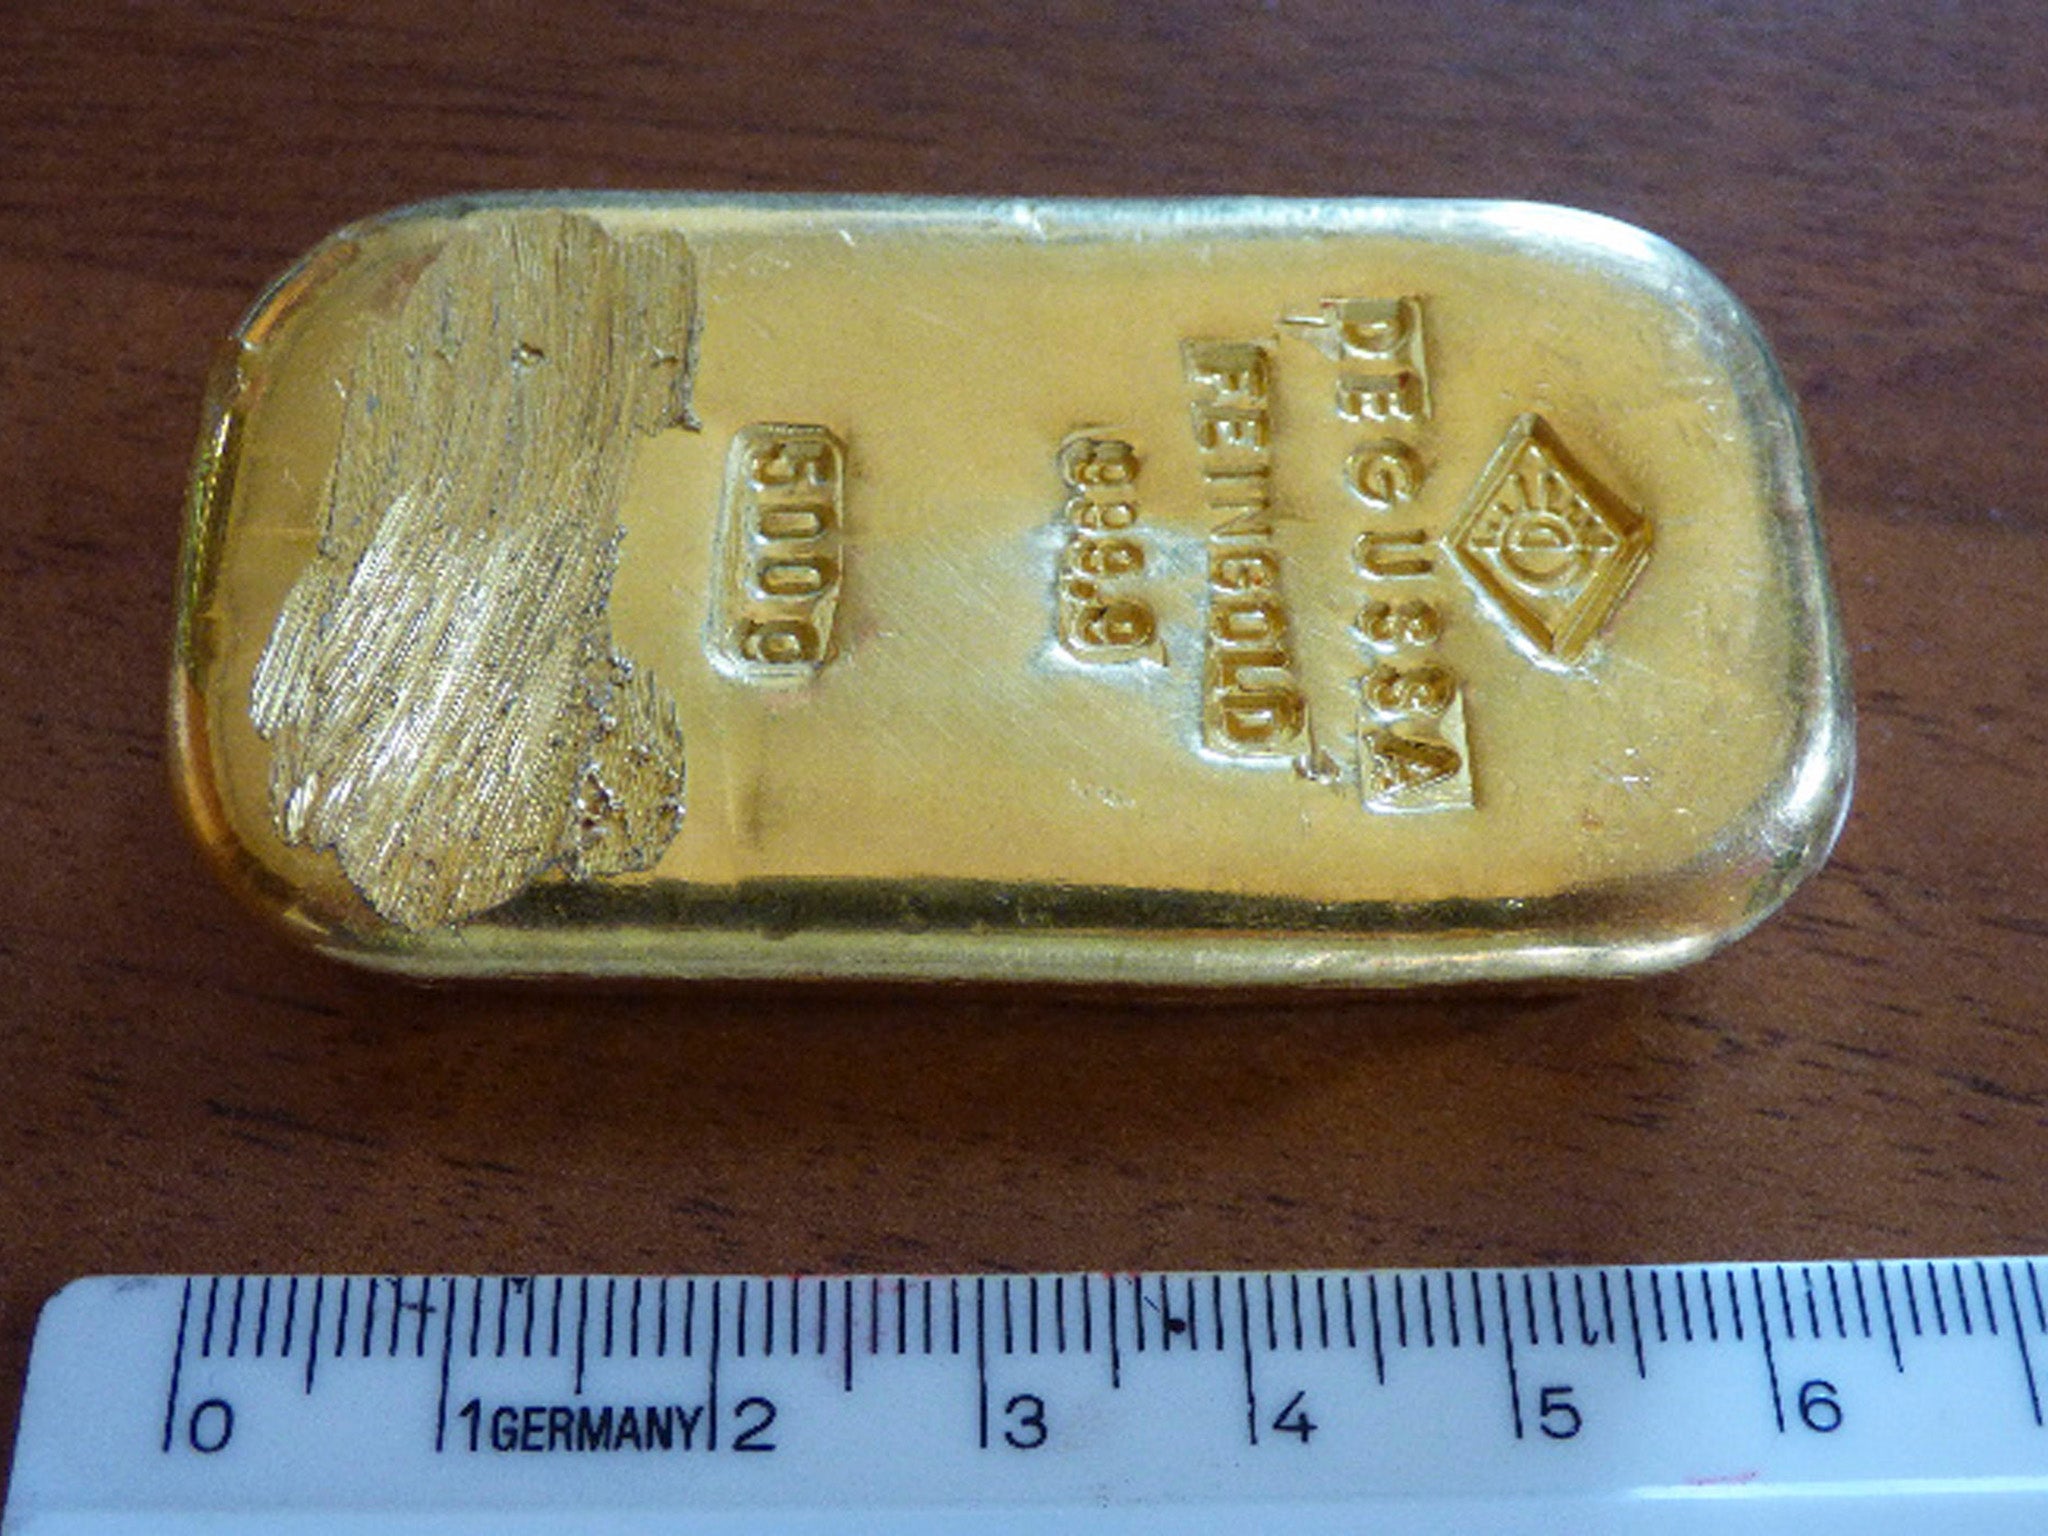 The gold bar that was found by a teenager when swimming in a lake near Berchtesgaden